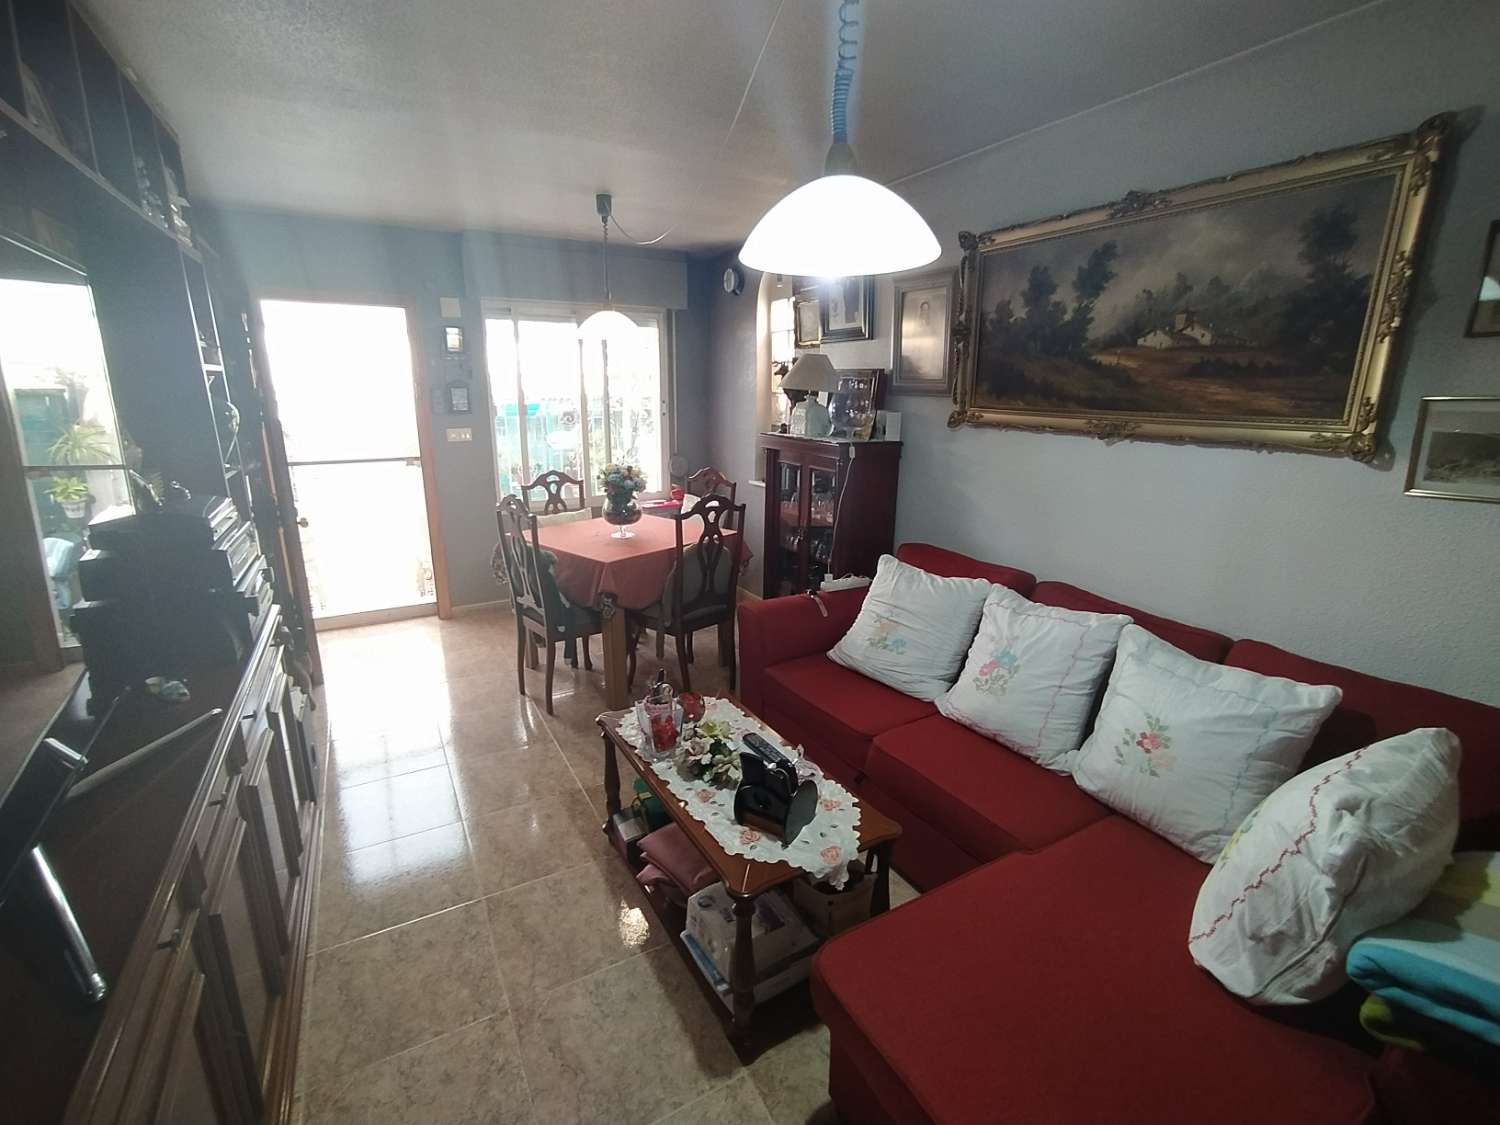 B-2949 Beautiful duplex with 3 bedrooms and 2 bathrooms with lovely views of the salt lakes.